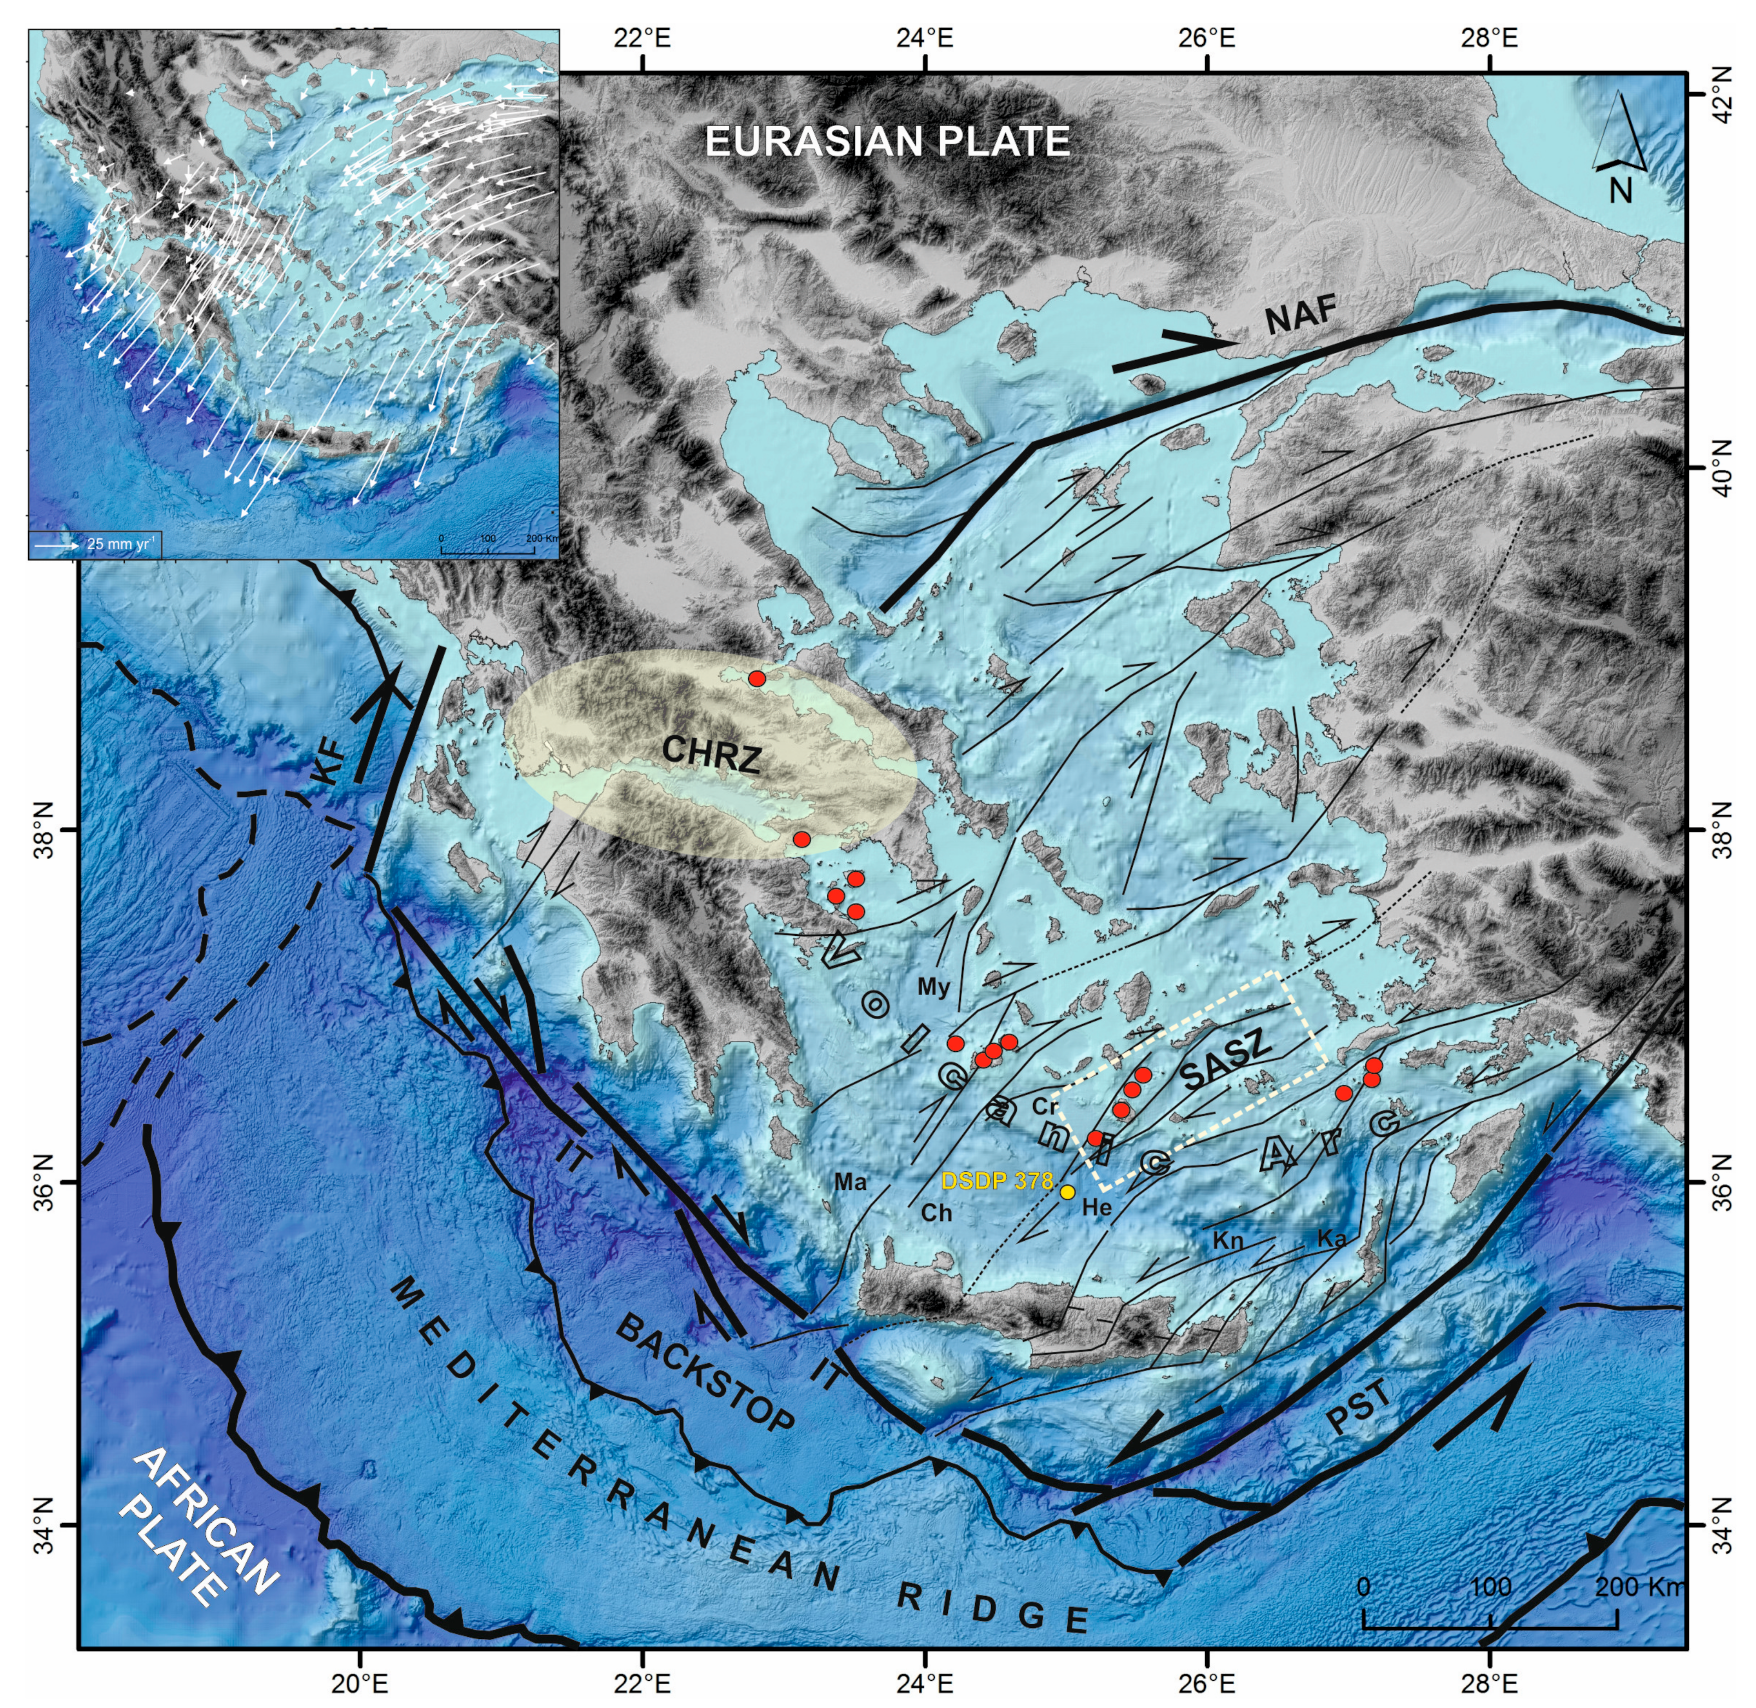 Geosciences | Free Full-Text | The Santorini-Amorgos Shear Zone: Evidence  for Dextral Transtension in the South Aegean Back-Arc Region, Greece